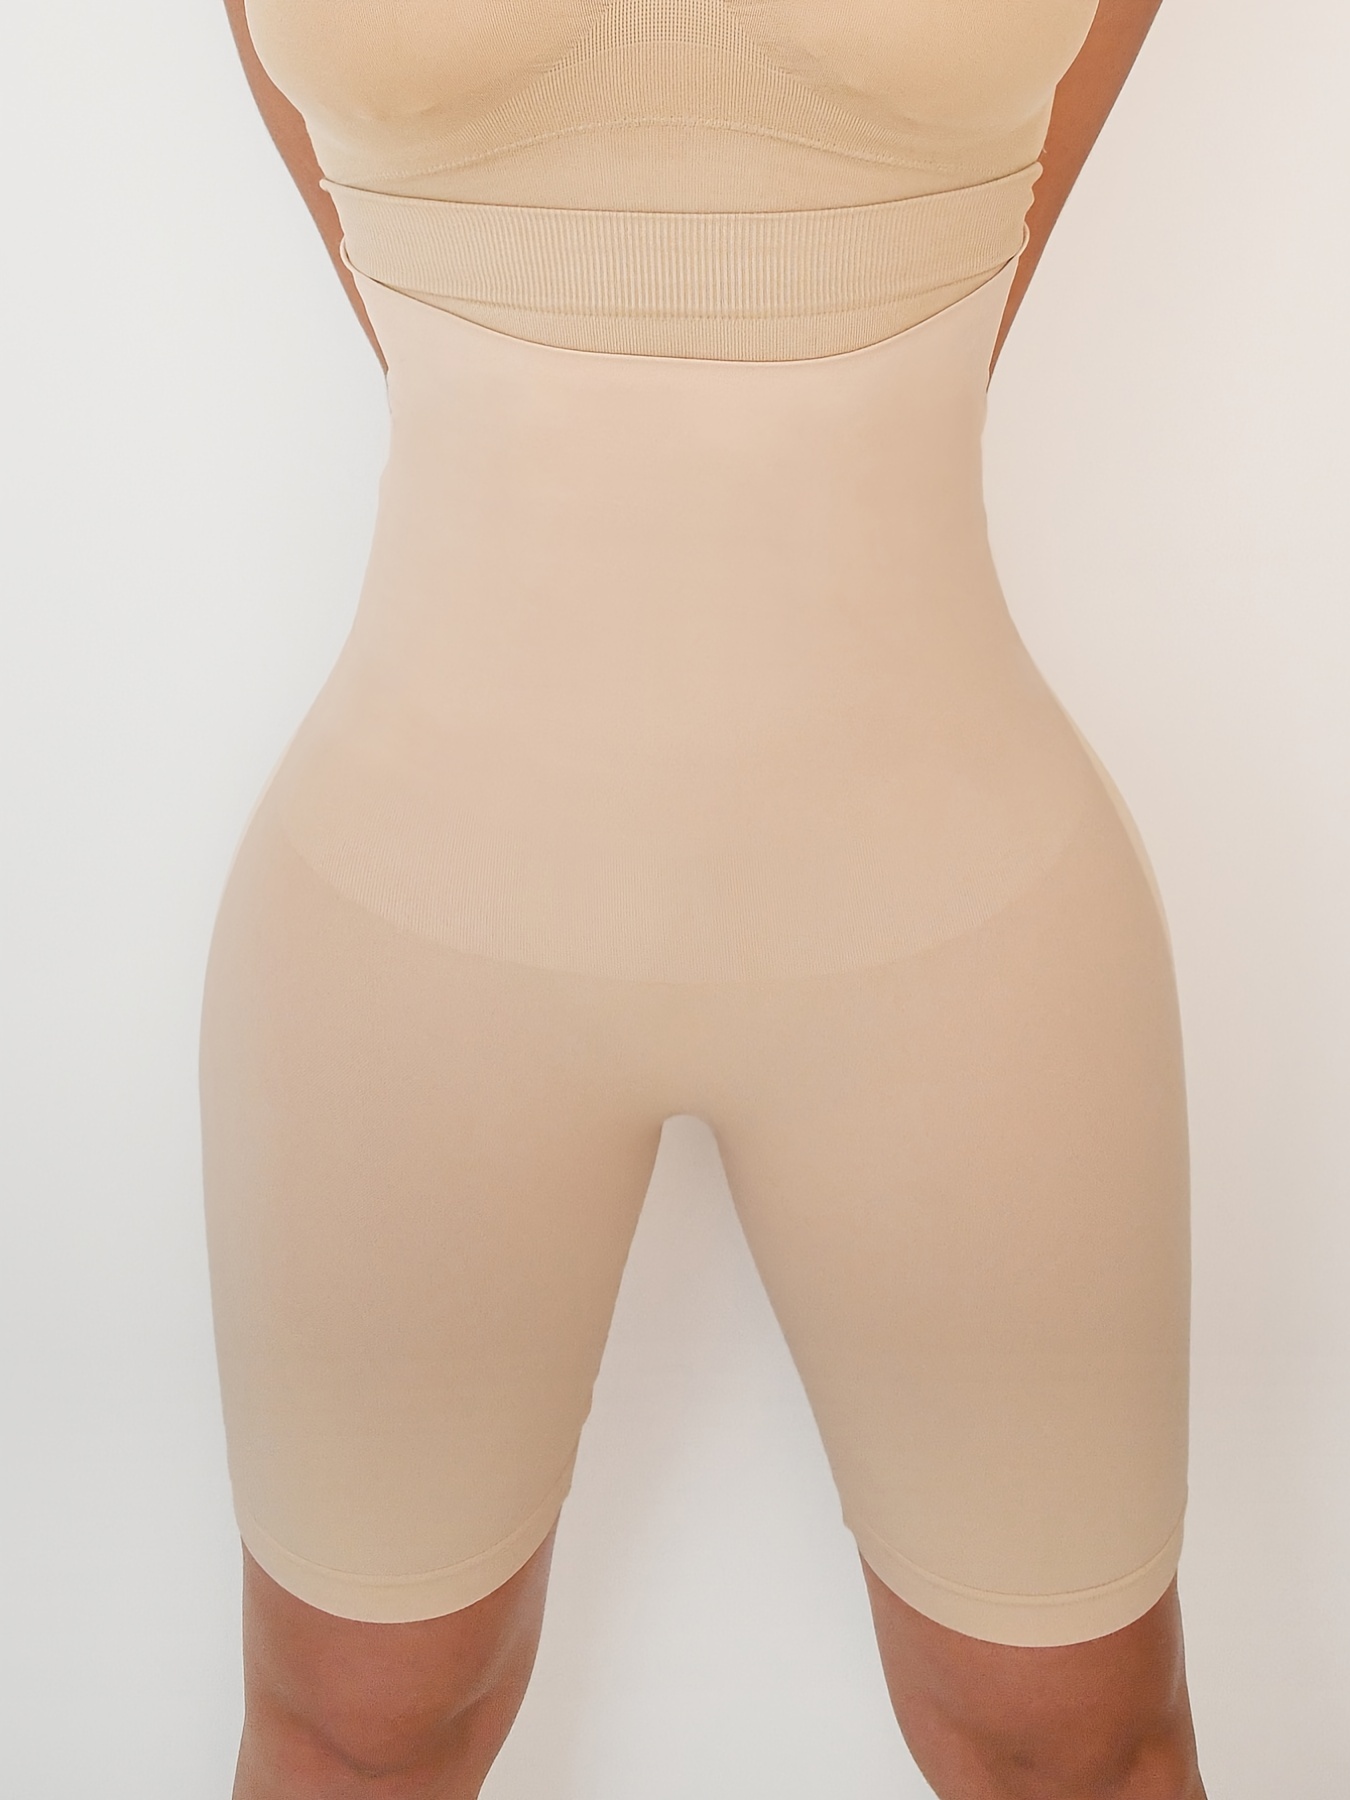 Shapewear & Fajas Colombianas: Truly Invisible Hi-Waist Control Panty Short